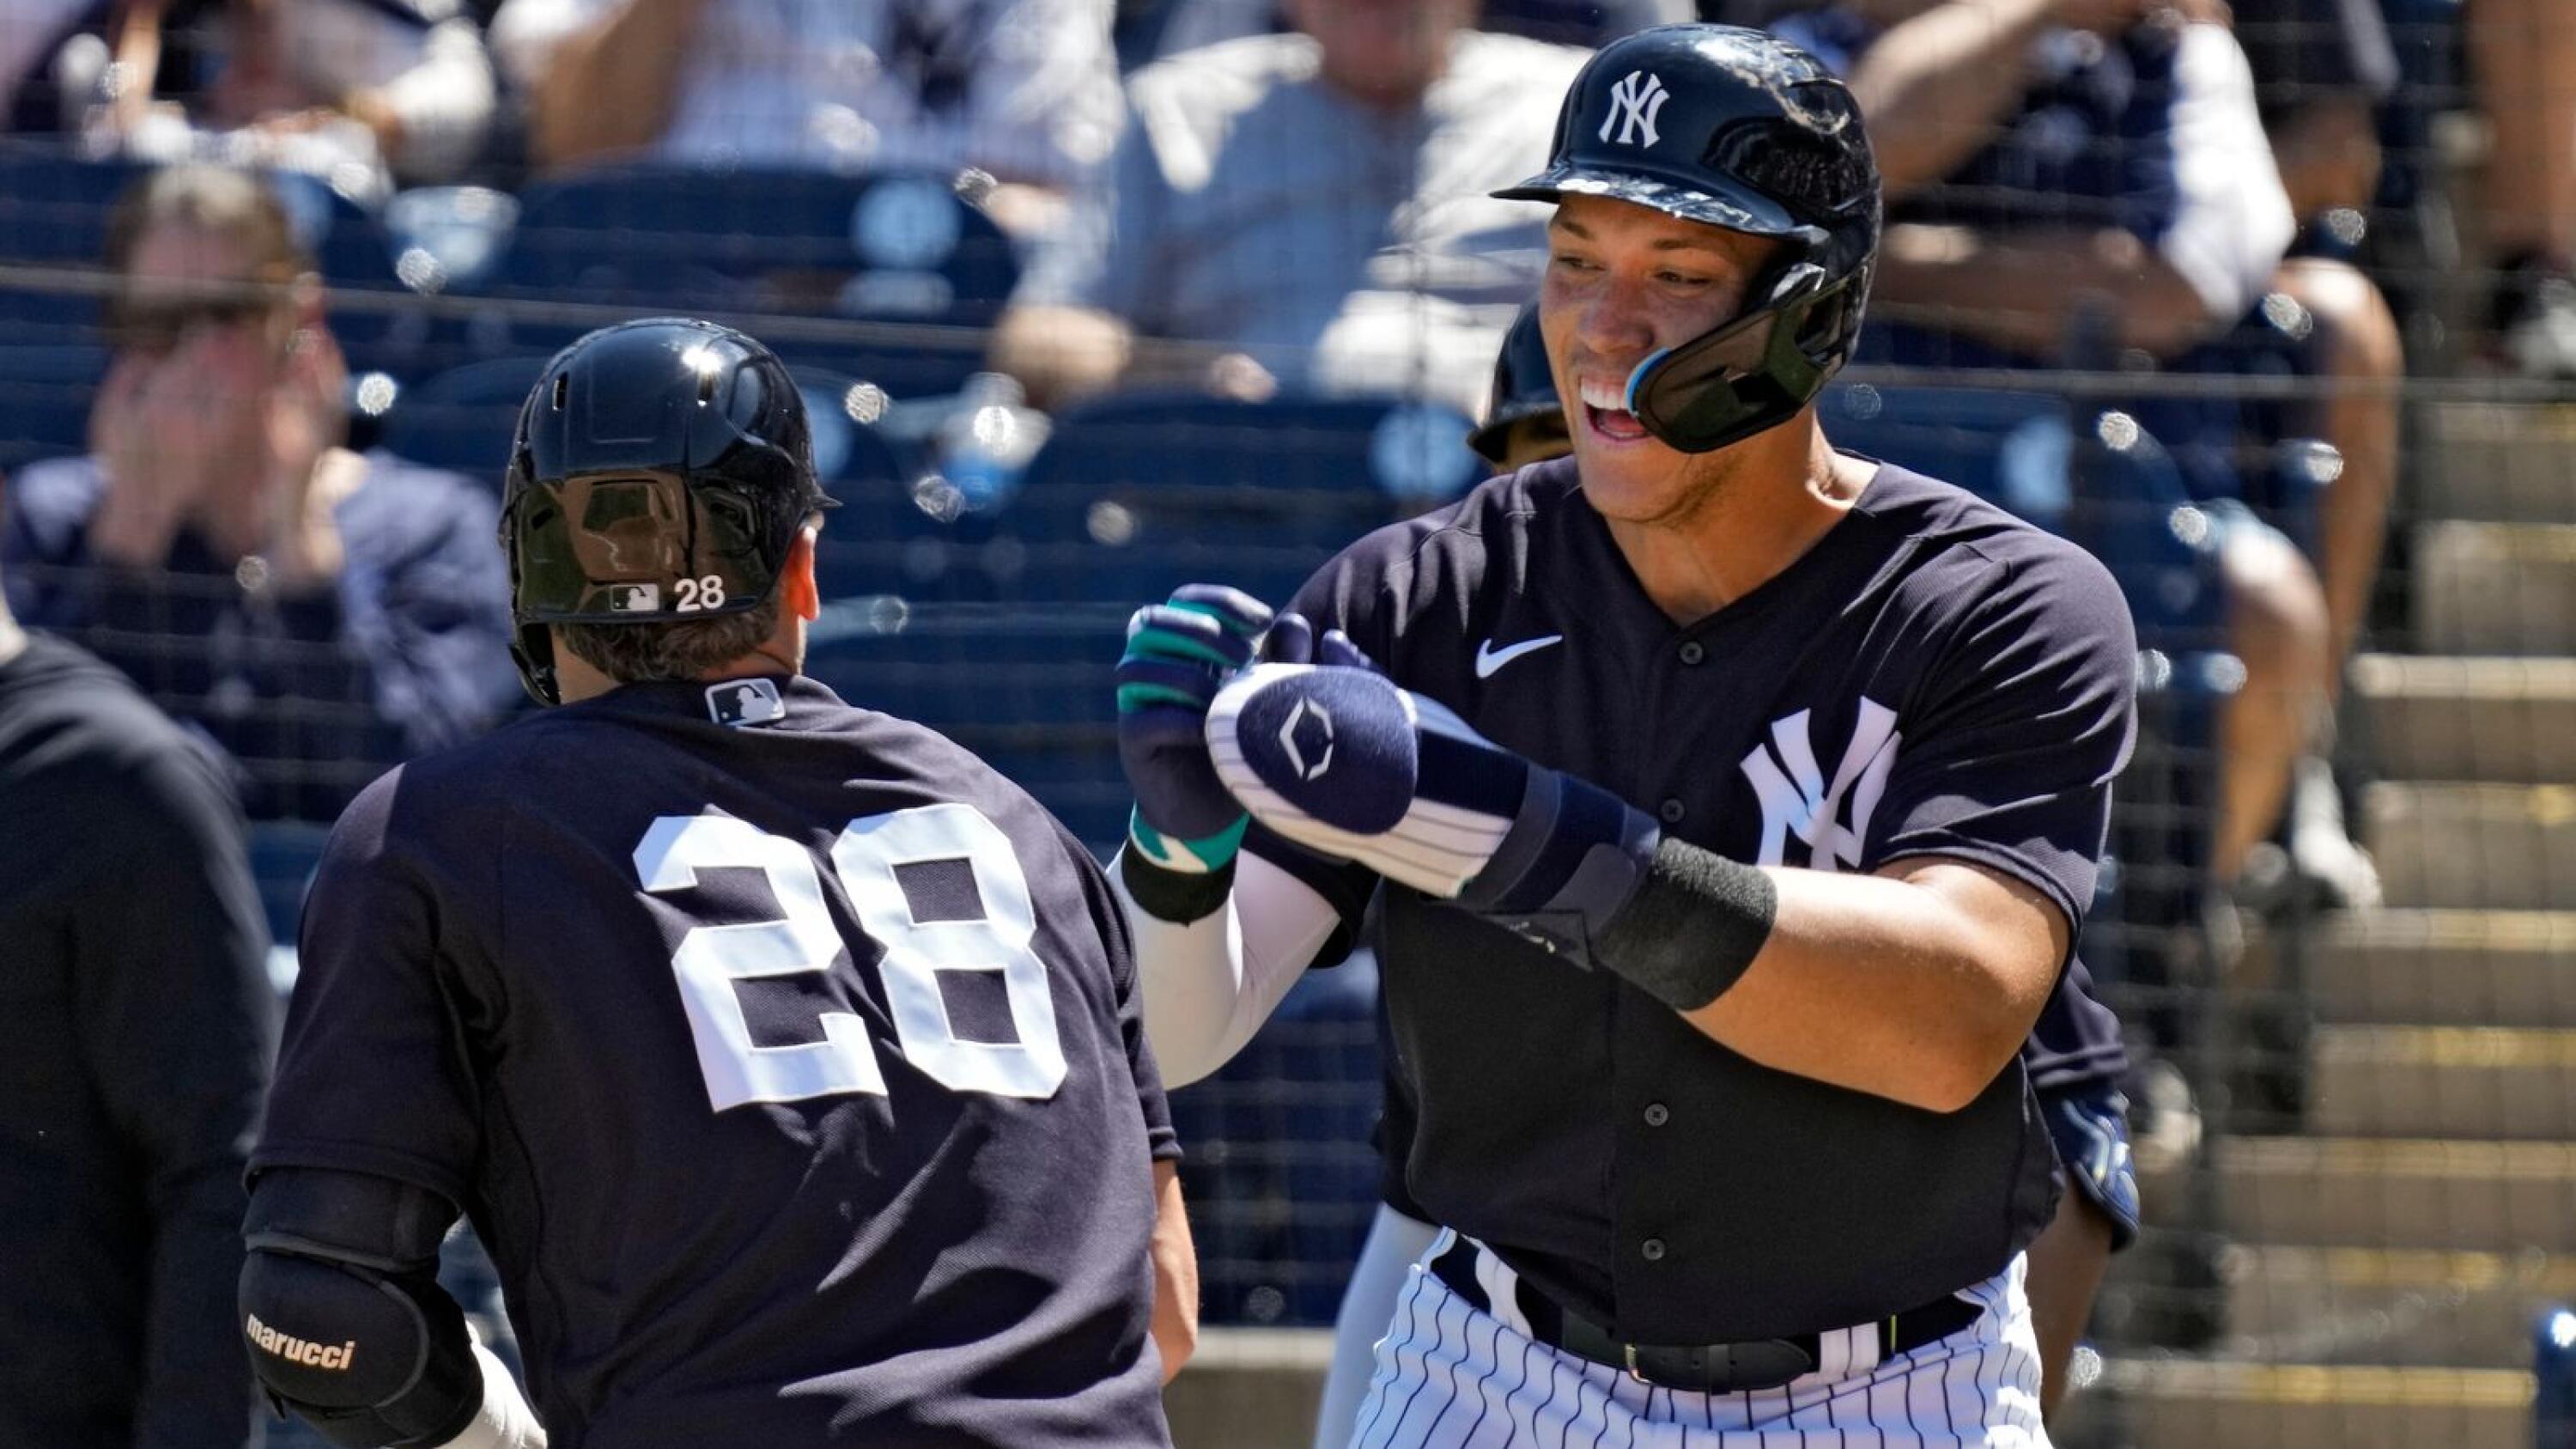 Milestone for Jeter in an Otherwise Lost Day for the Yankees - The